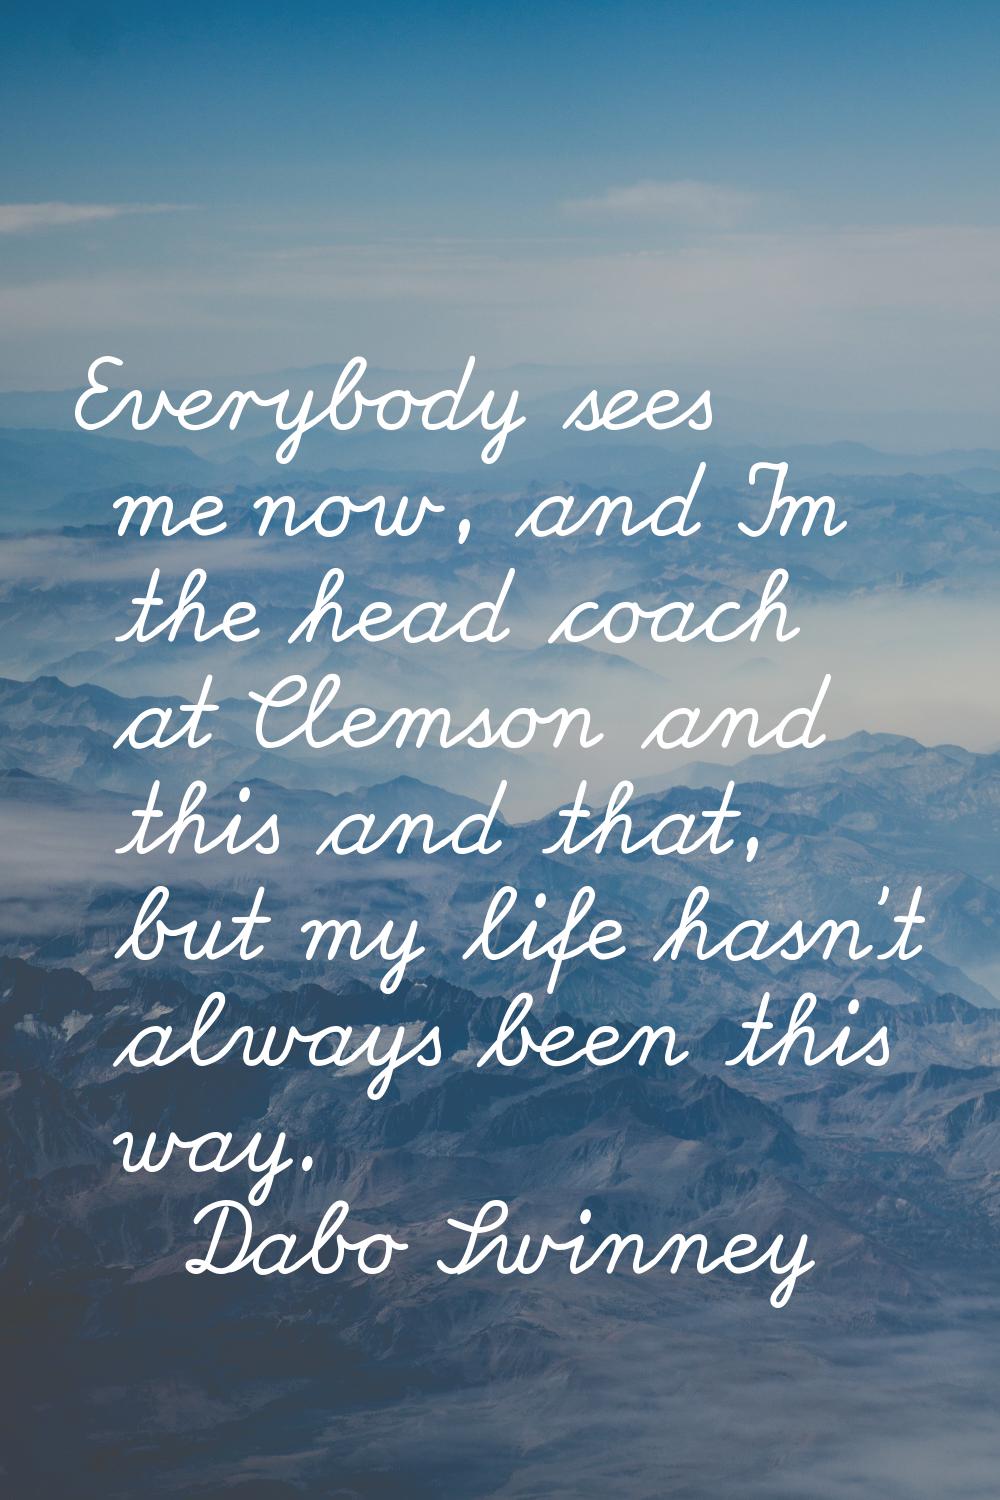 Everybody sees me now, and I'm the head coach at Clemson and this and that, but my life hasn't alwa